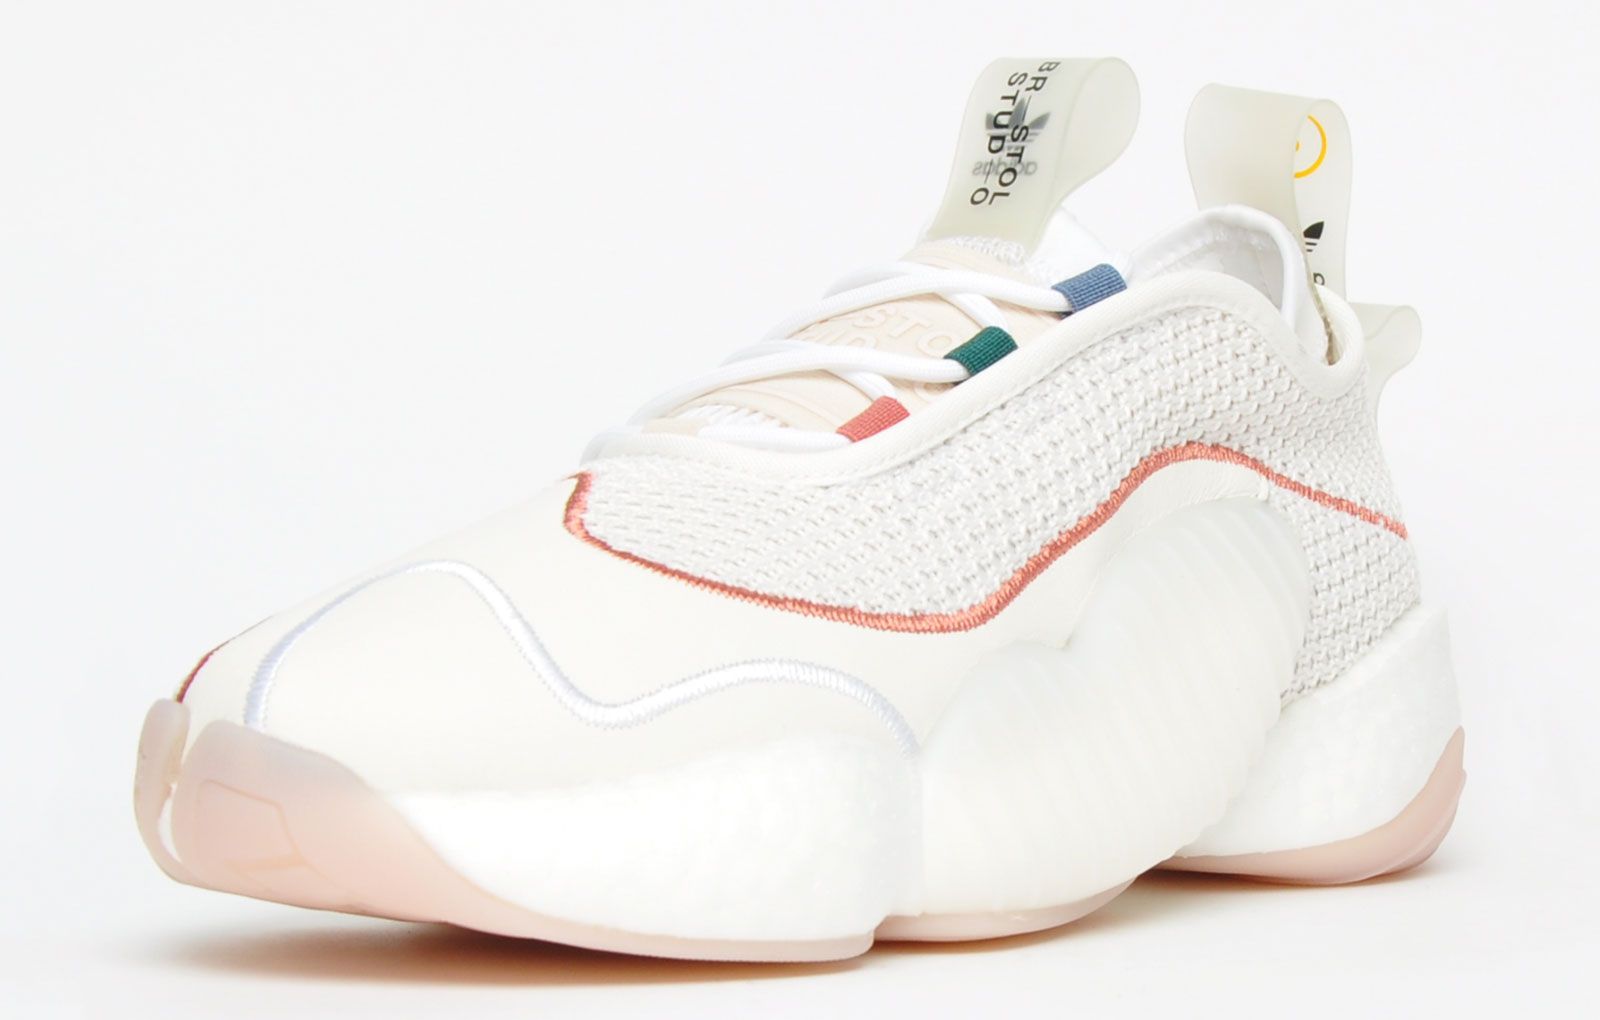 Adidas have joined in collaboration with emerging L.A fashion house Bristol Studio to introduce the exclusive Crazy BYW II to the market. <p class=